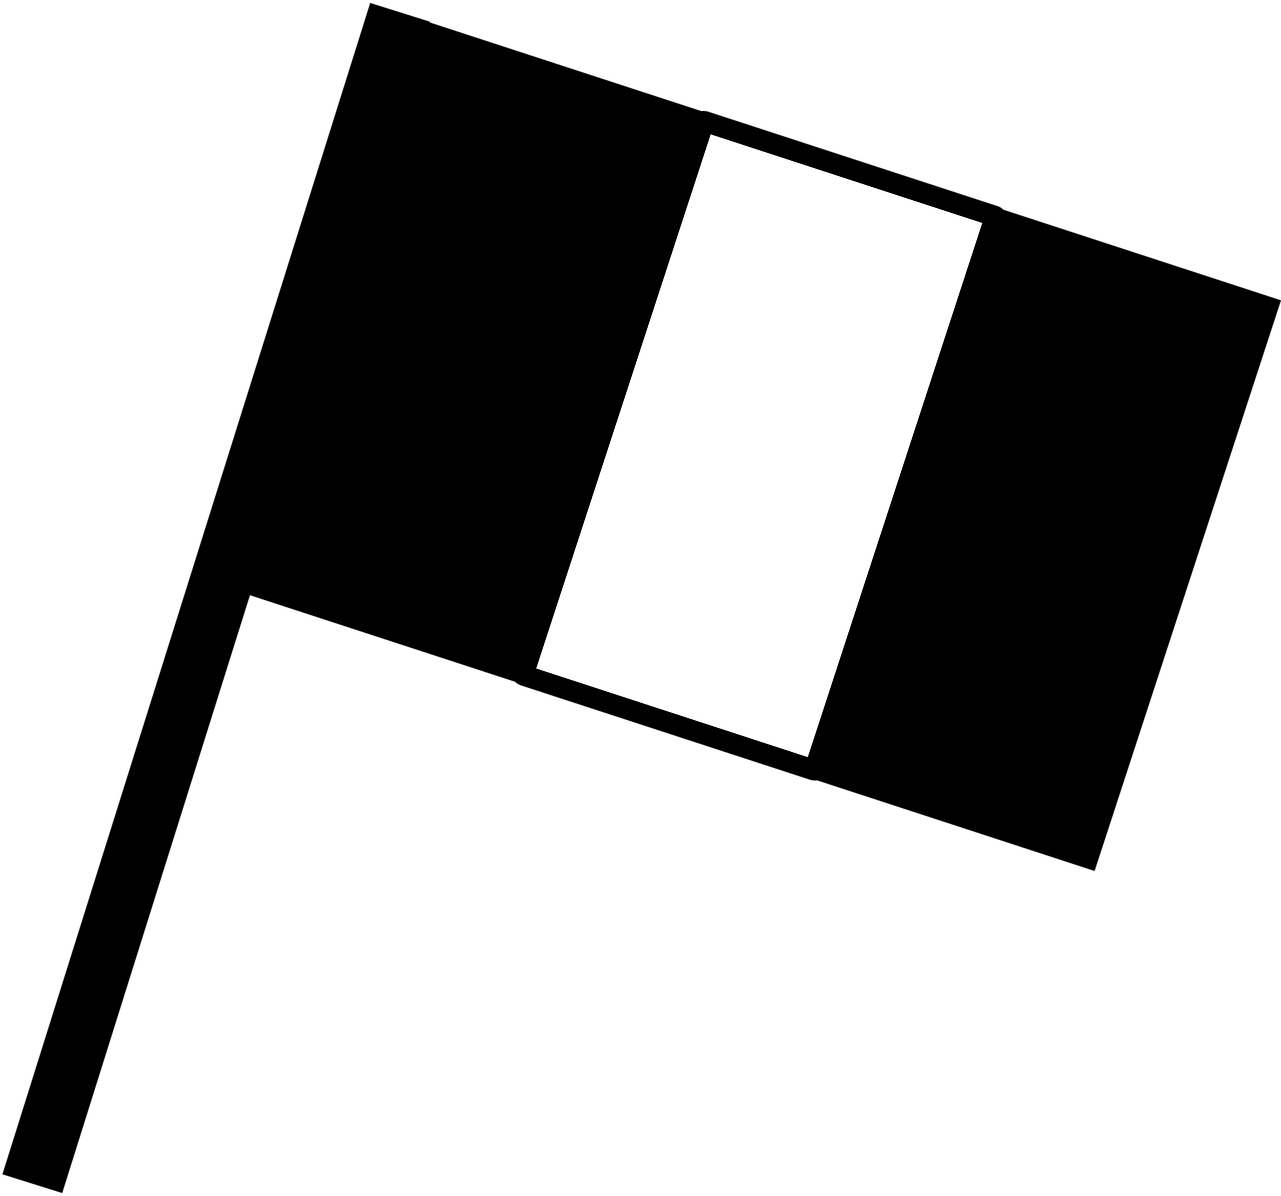 A White Rectangular Object In A Black Background